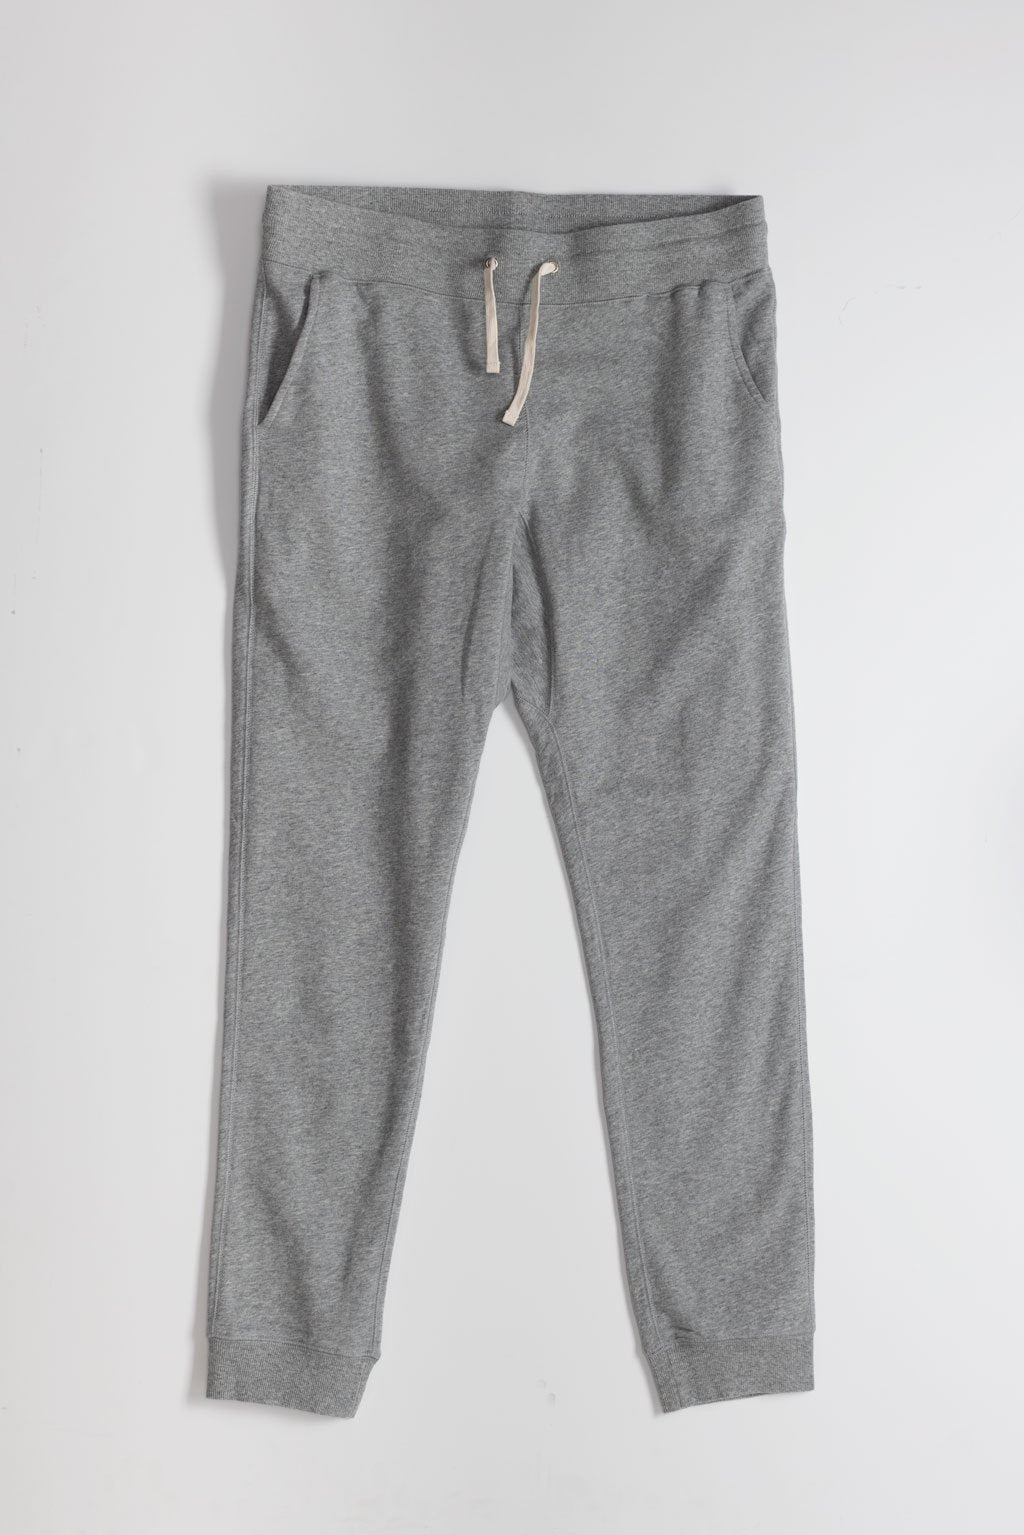 NS2167-3 250g French Terry Sweatpants in Melange Grey 01